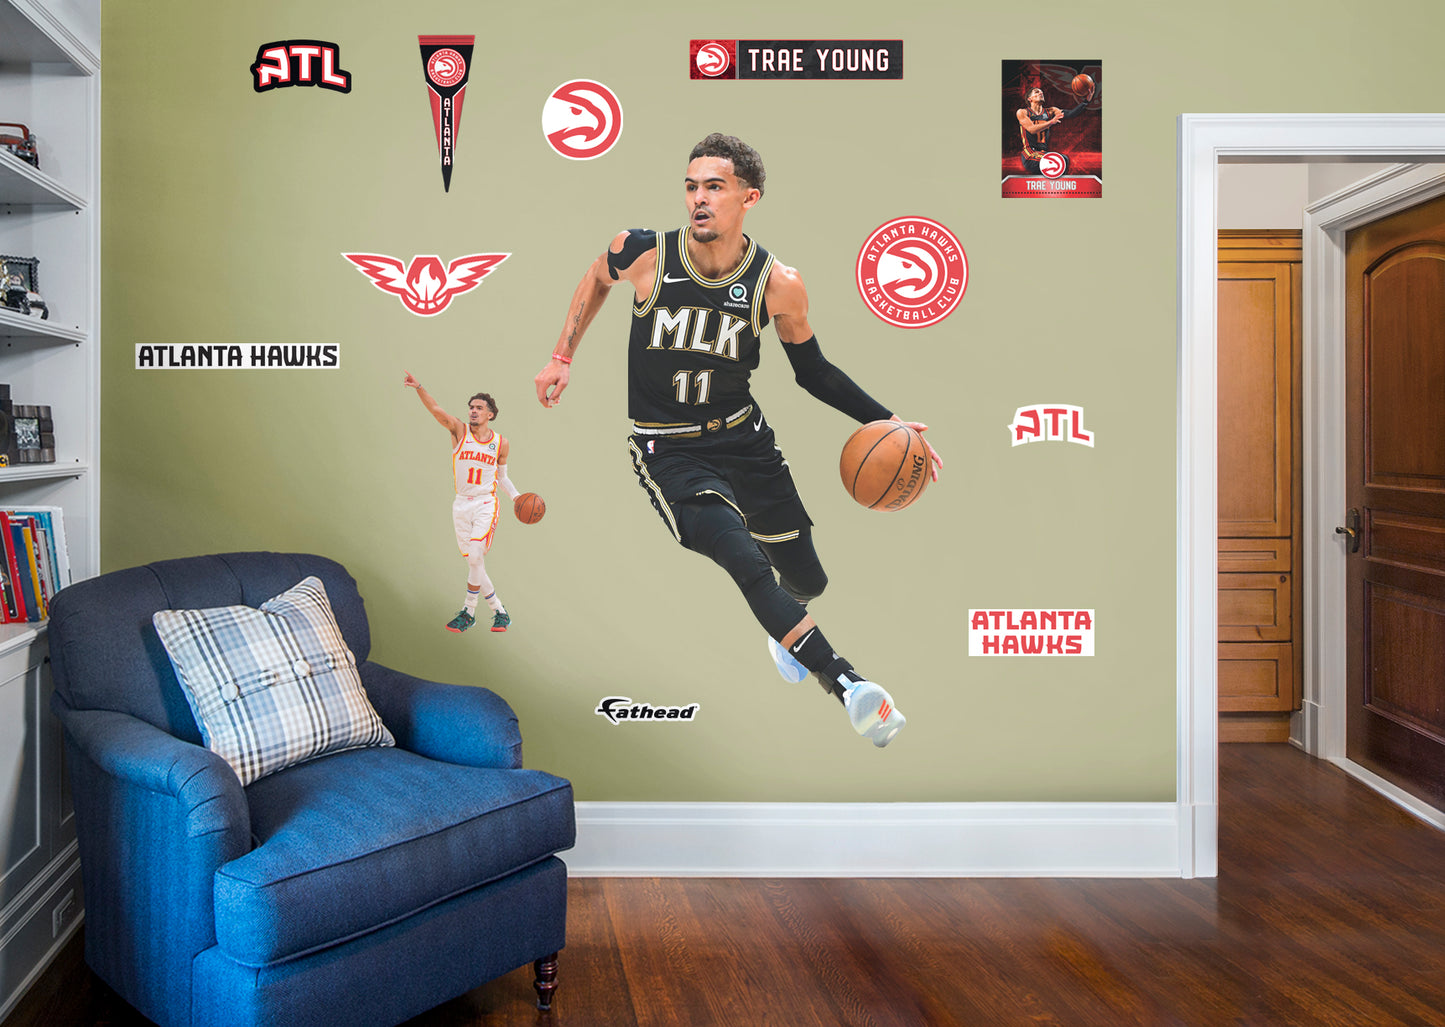 Atlanta Hawks: Trae Young 2021 MLK Jersey - NBA Removable Wall Adhesive Wall Decal Giant Athlete +2 Wall Decals 34W x 51H